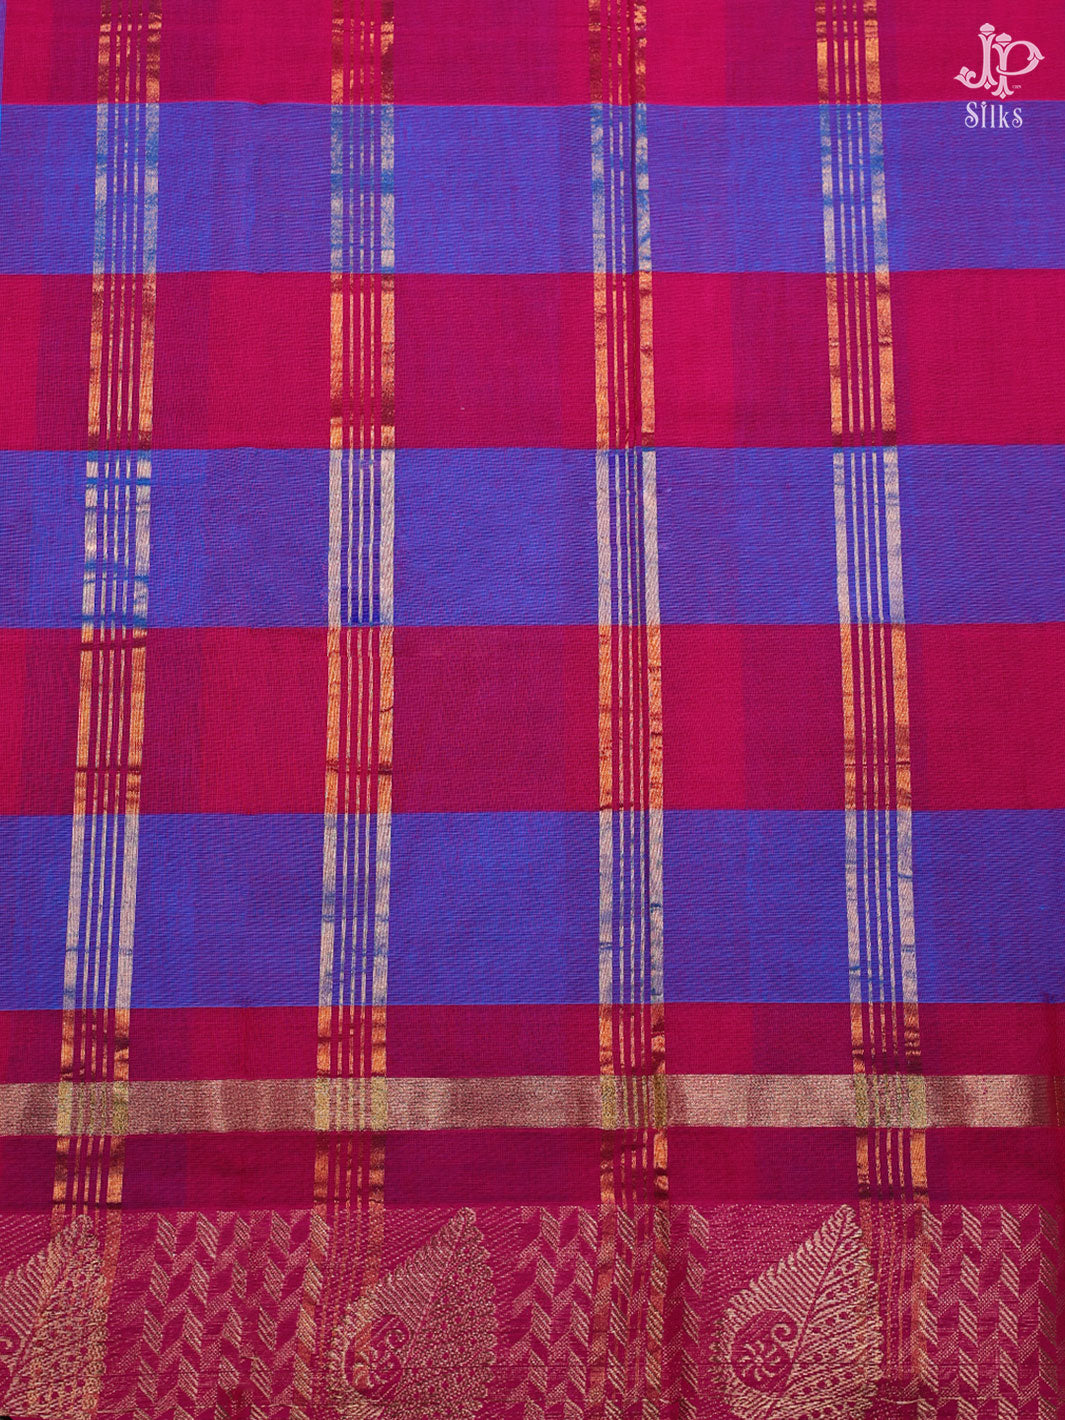 Blue and Red Cotton Saree - D2541 - View 3